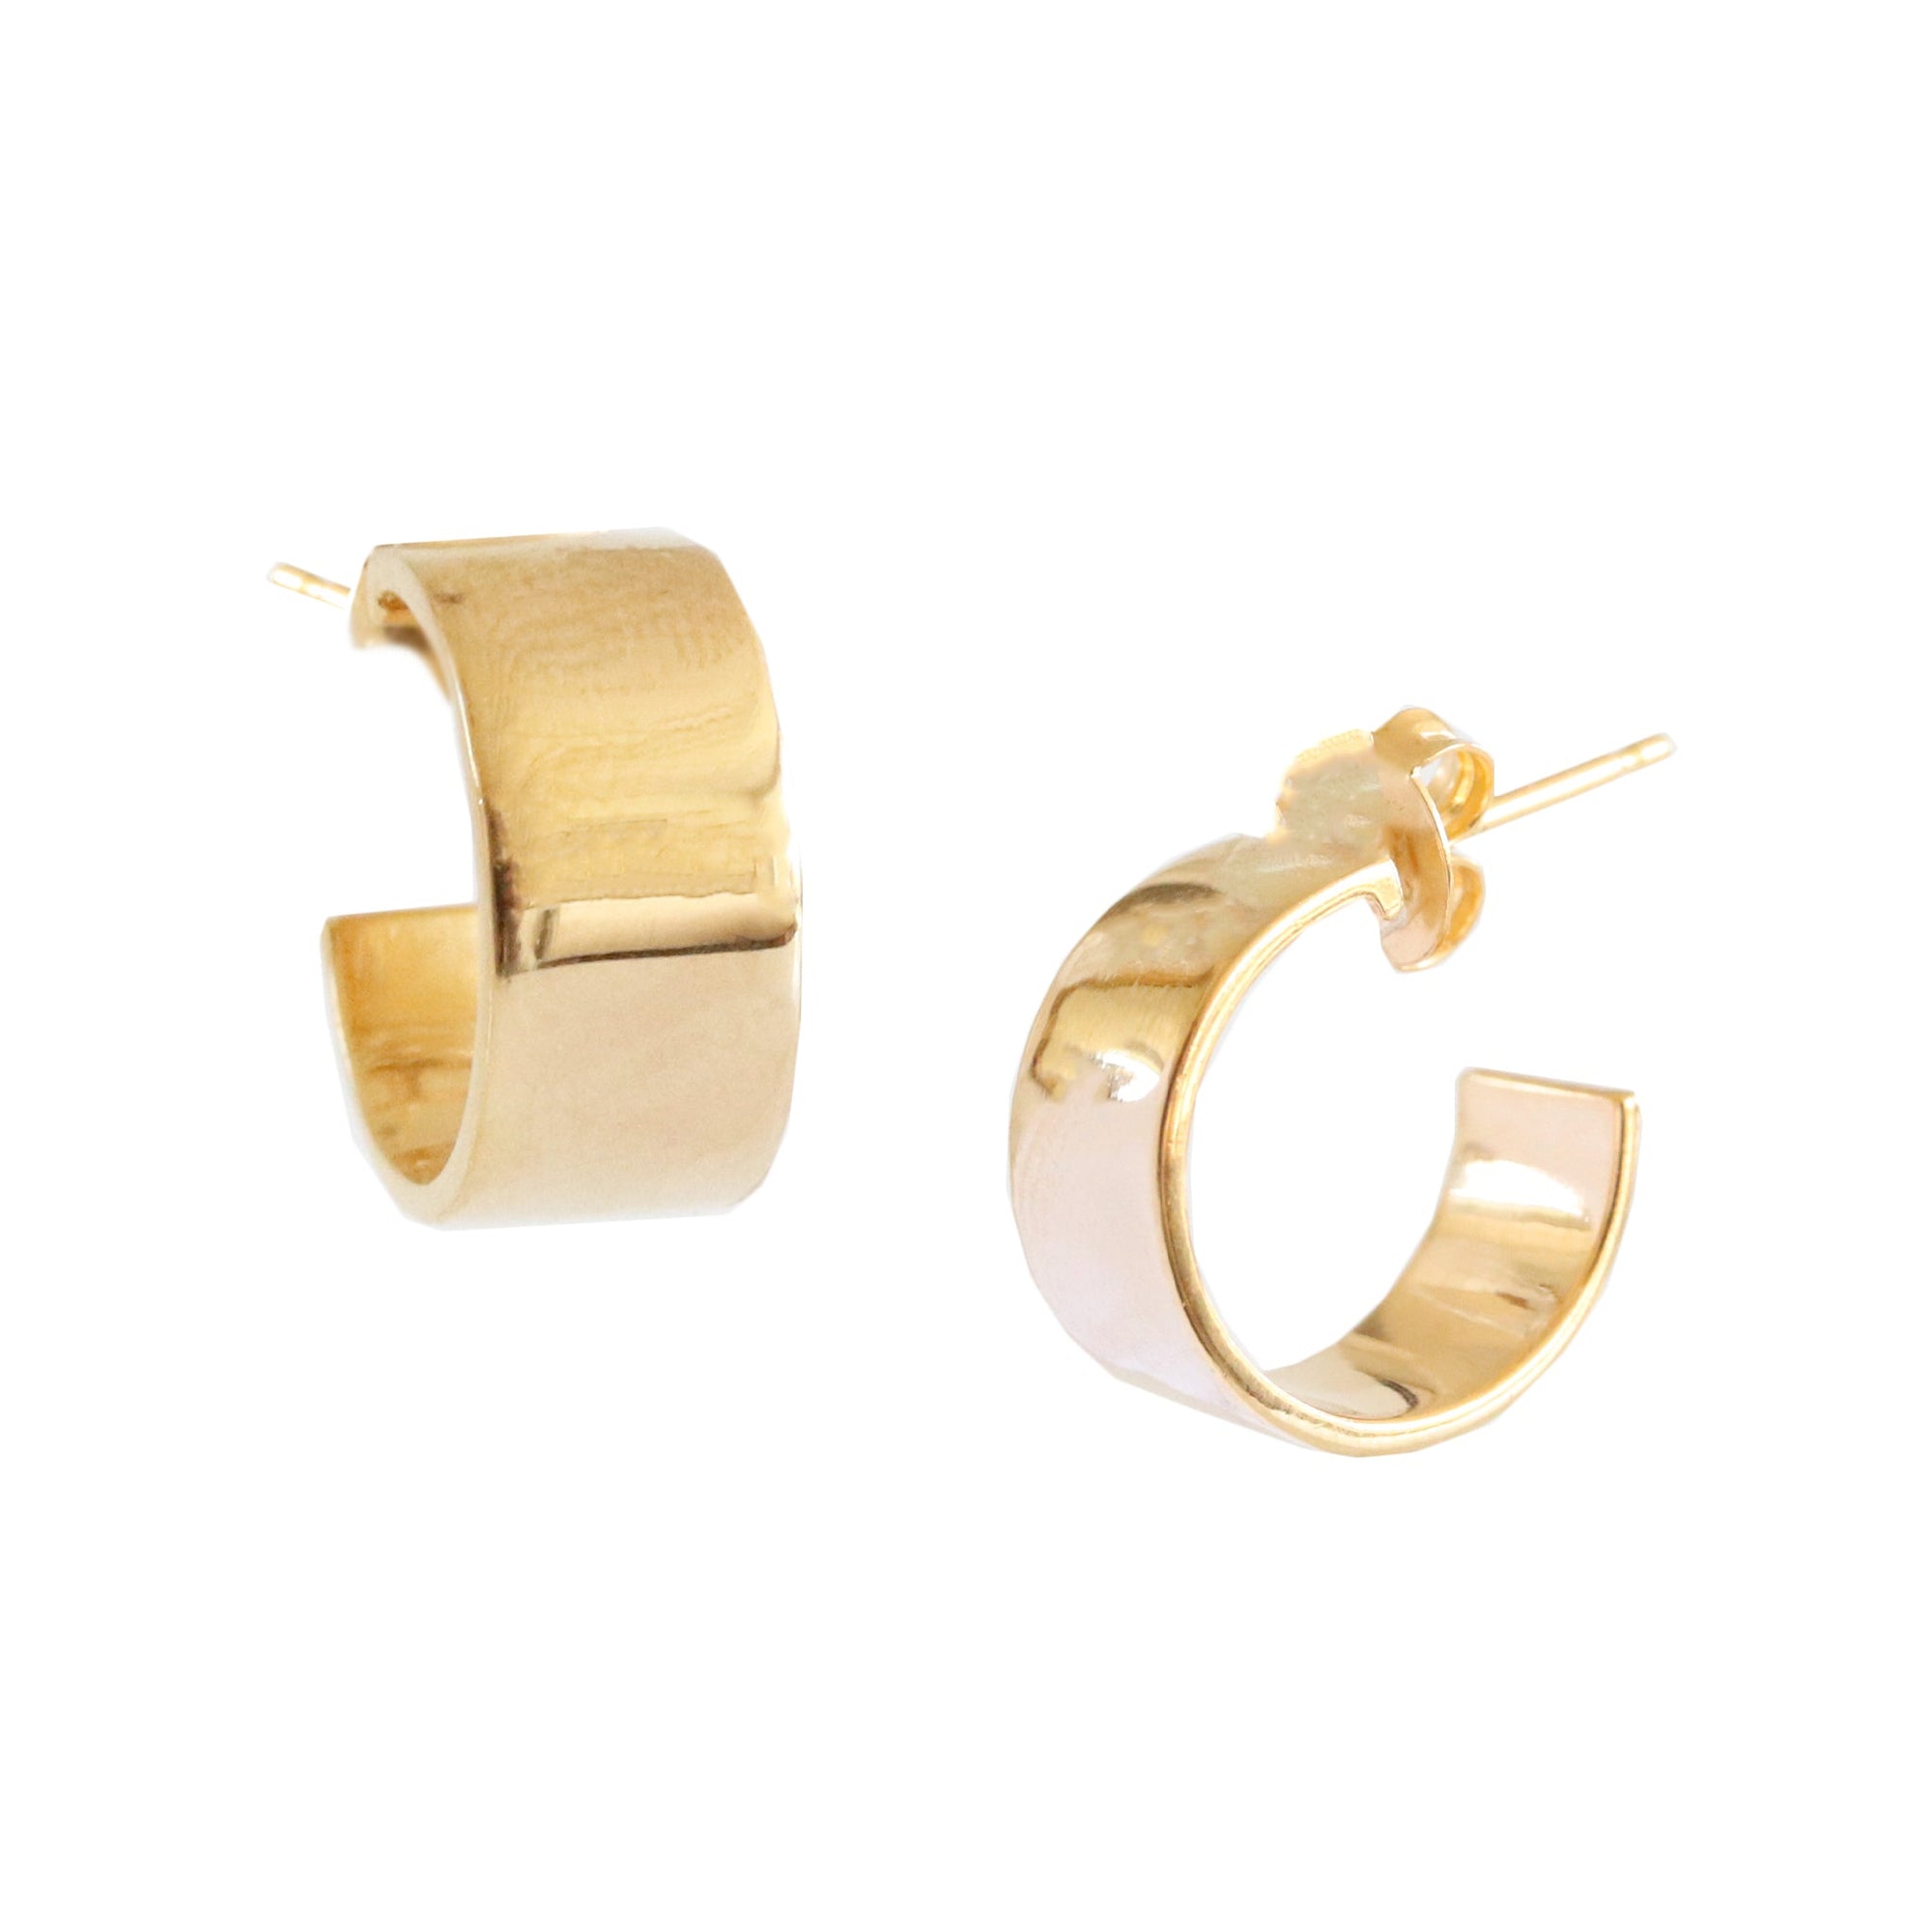 POISE CIGAR BAND HOOPS - GOLD - SO PRETTY CARA COTTER